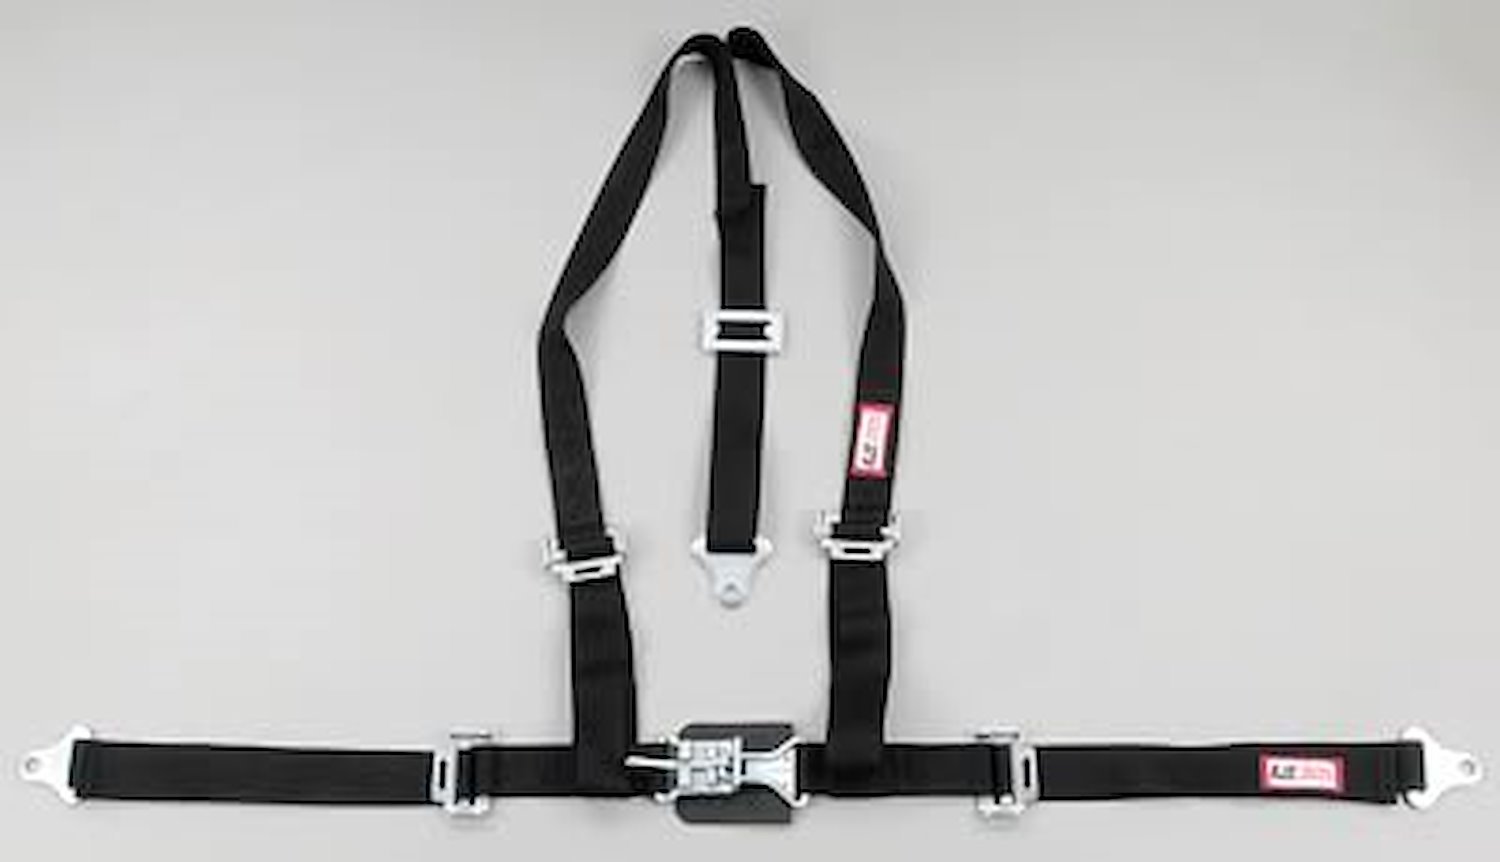 NON-SFI L&L HARNESS 2 PULL DOWN Lap Belt w/Adjuster 2 S.H. Individual FLOOR Mount ALL WRAP ENDS HOT PINK